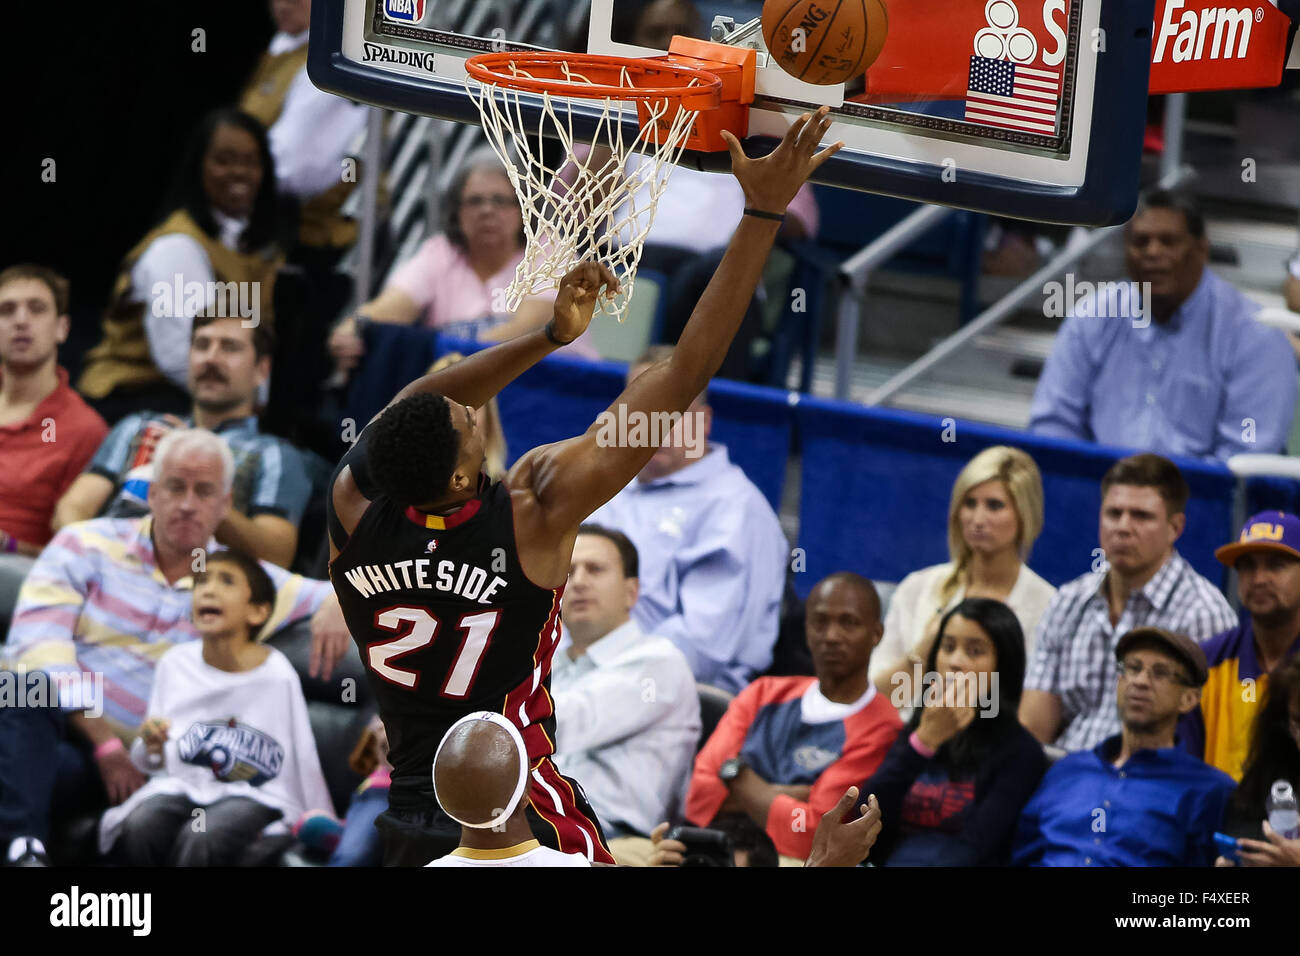 New Orleans, LA, USA. 23rd Oct, 2015. Miami Heat center Hassan Whiteside (21) shooting a lay up during the game between the Miami Heat and New Orleans Pelicans at the Smoothie King Center in New Orleans, LA. Stephen Lew/CSM/Alamy Live News Stock Photo